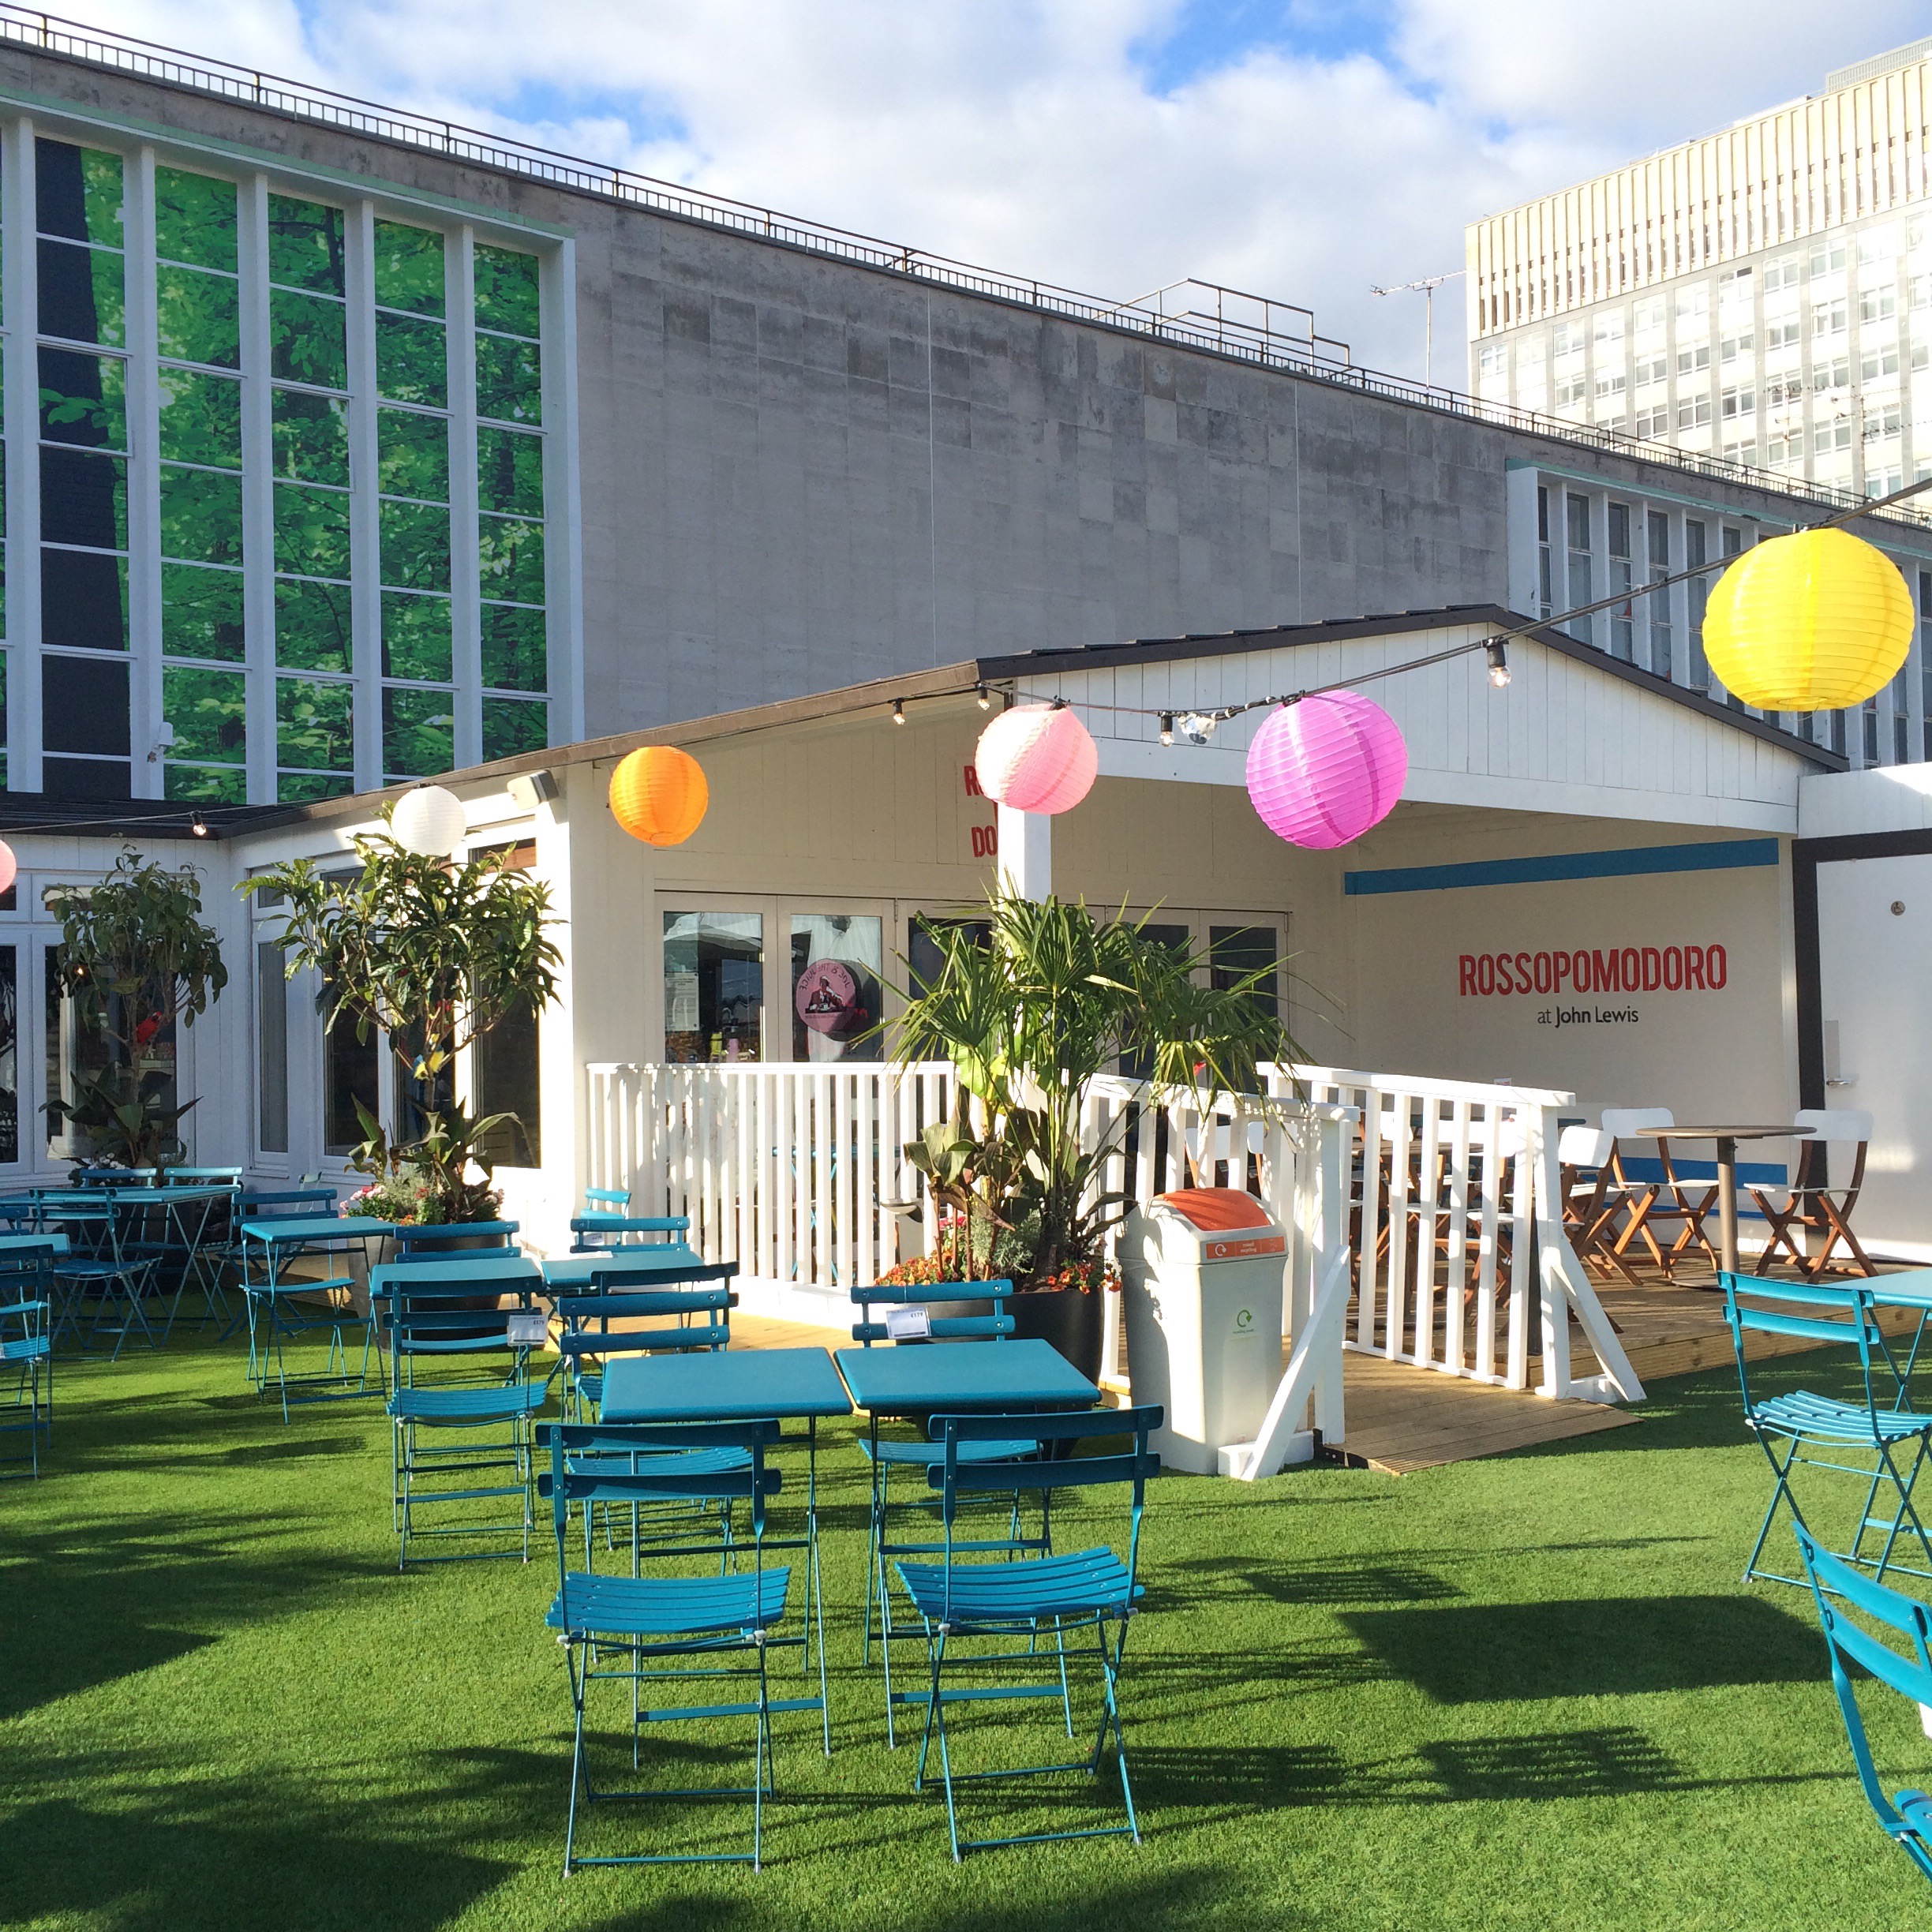 Neapolitan café RossoTerrazza pops up on John Lewis rooftop – /// The Curious Londoner